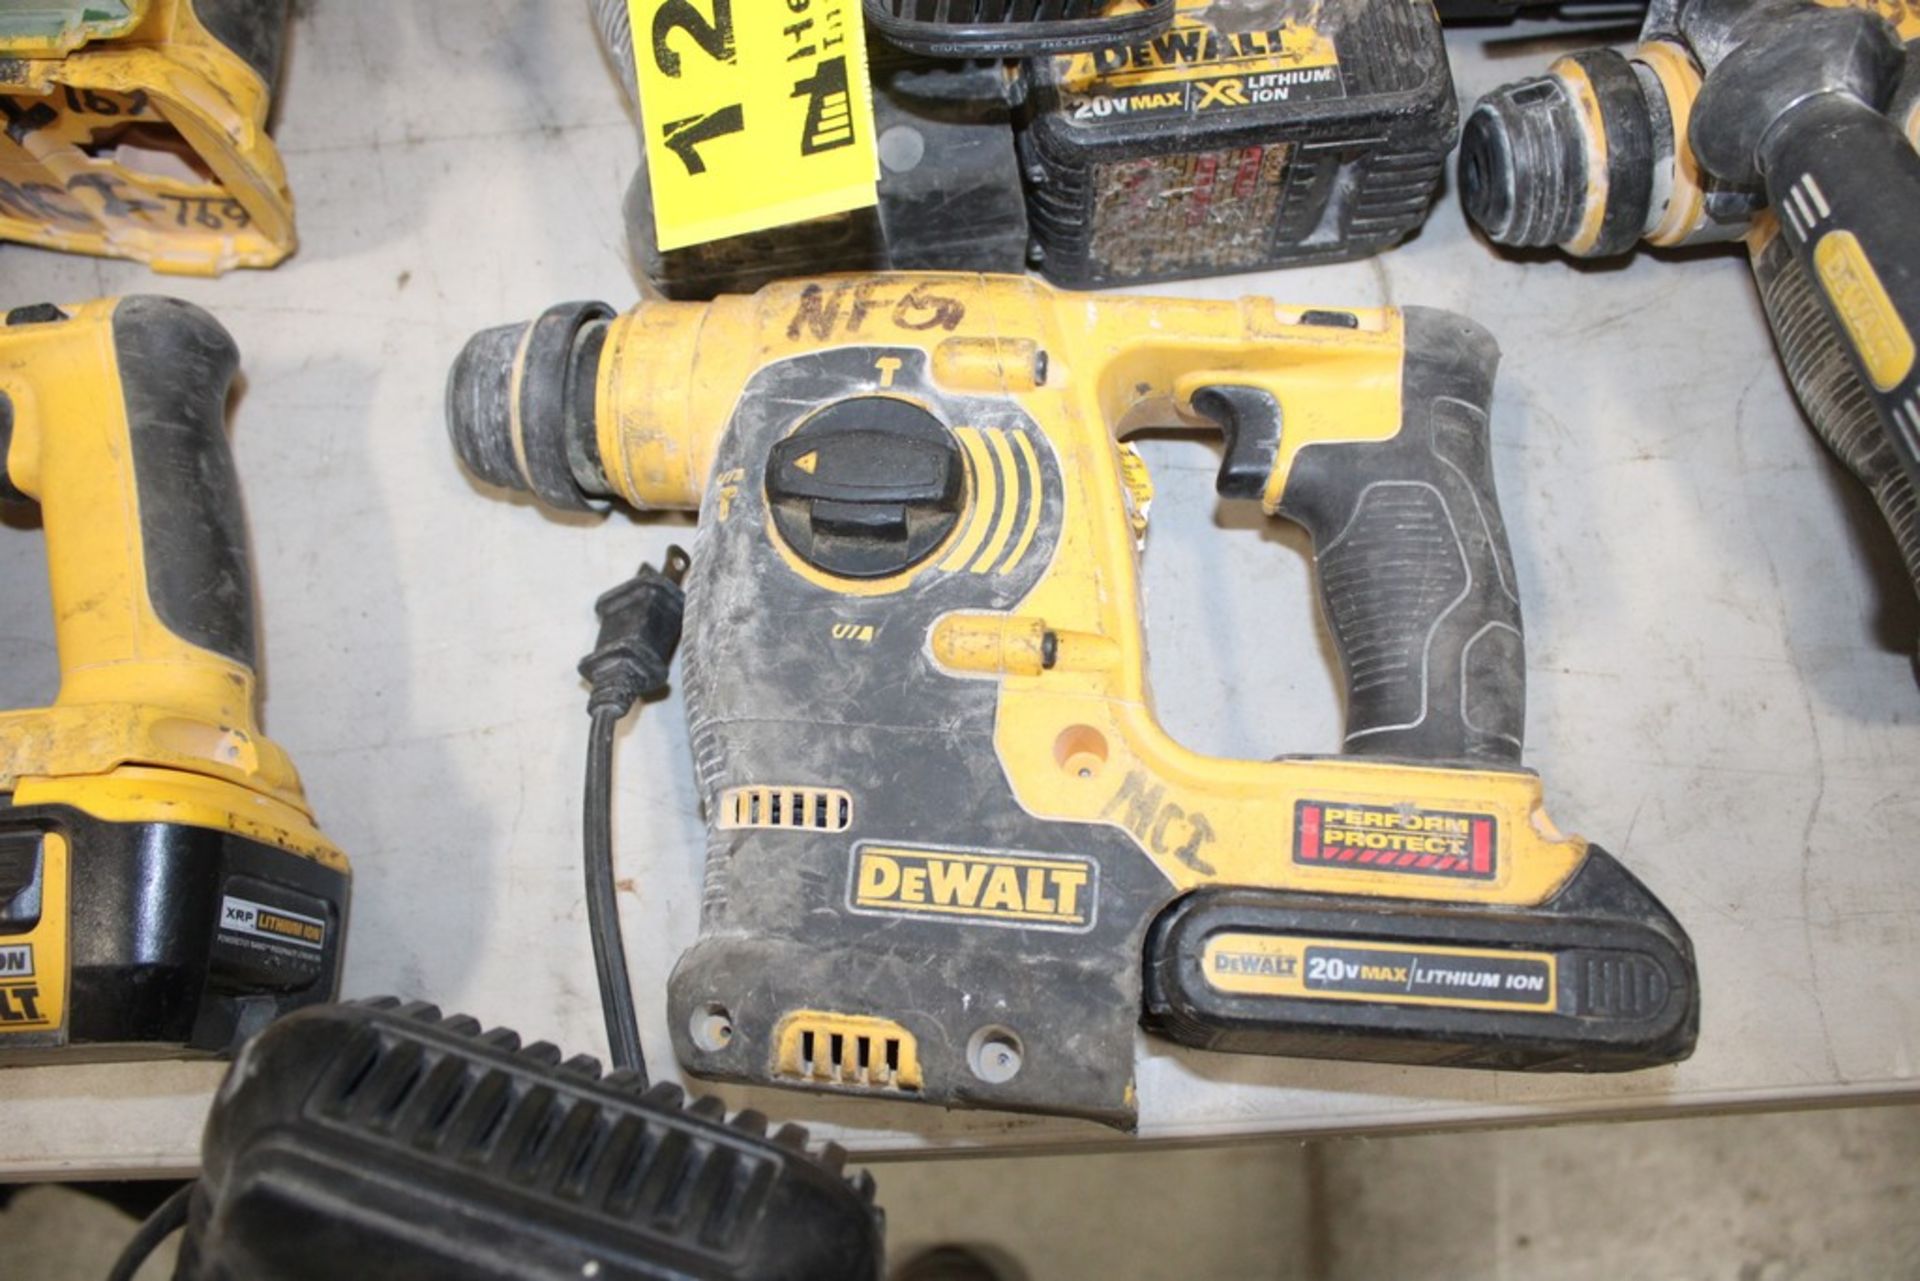 DEWALT MODEL NO. DCH253 20V CORDLESS SDS HAMMER DRILL WITH BATTERY AND CHARGER - Image 2 of 2